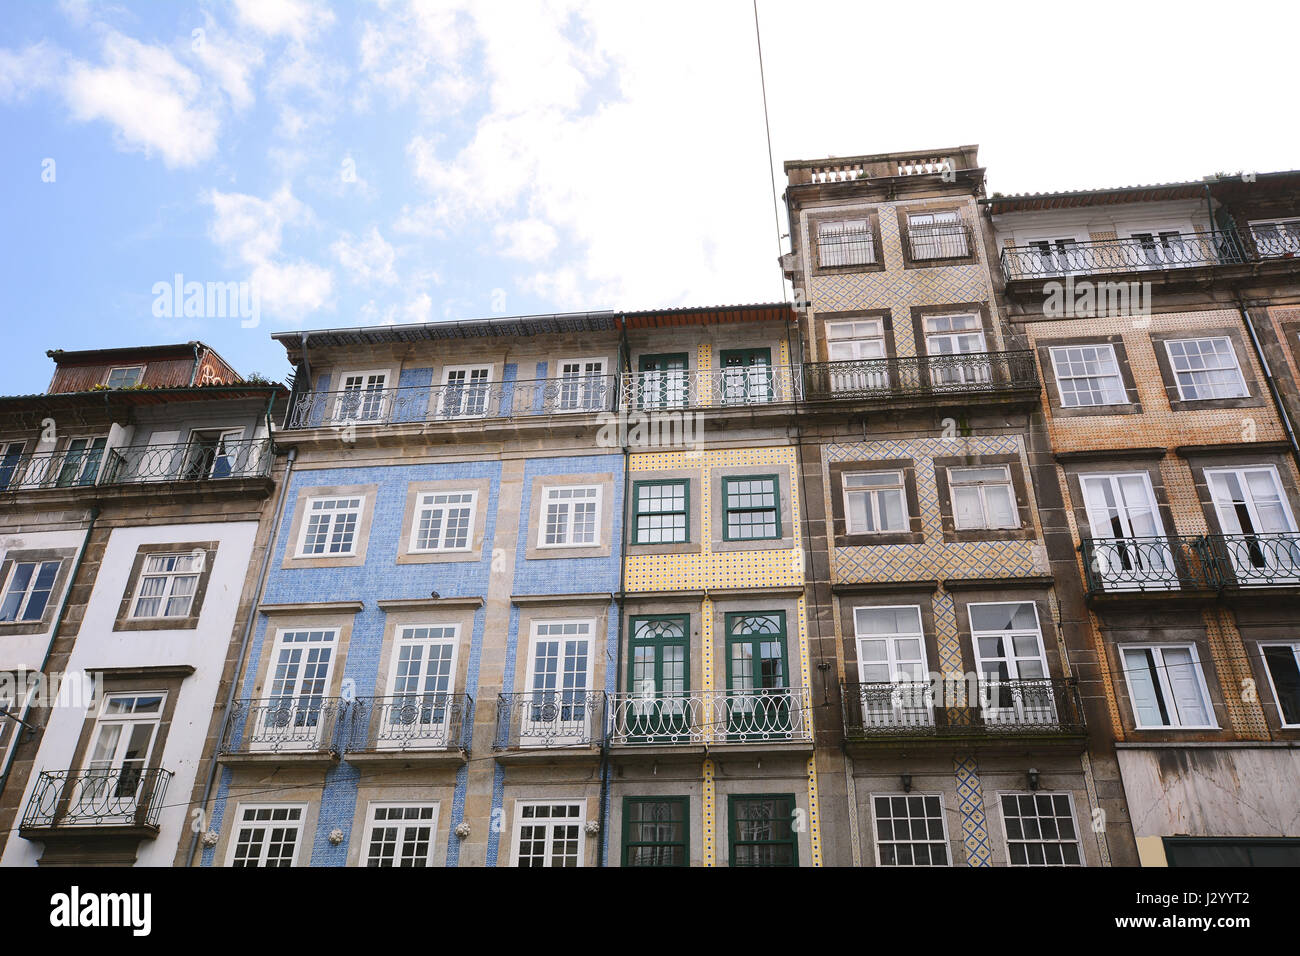 Facades of old colorful different houses in touristic district, Porto, Portugal. Stock Photo